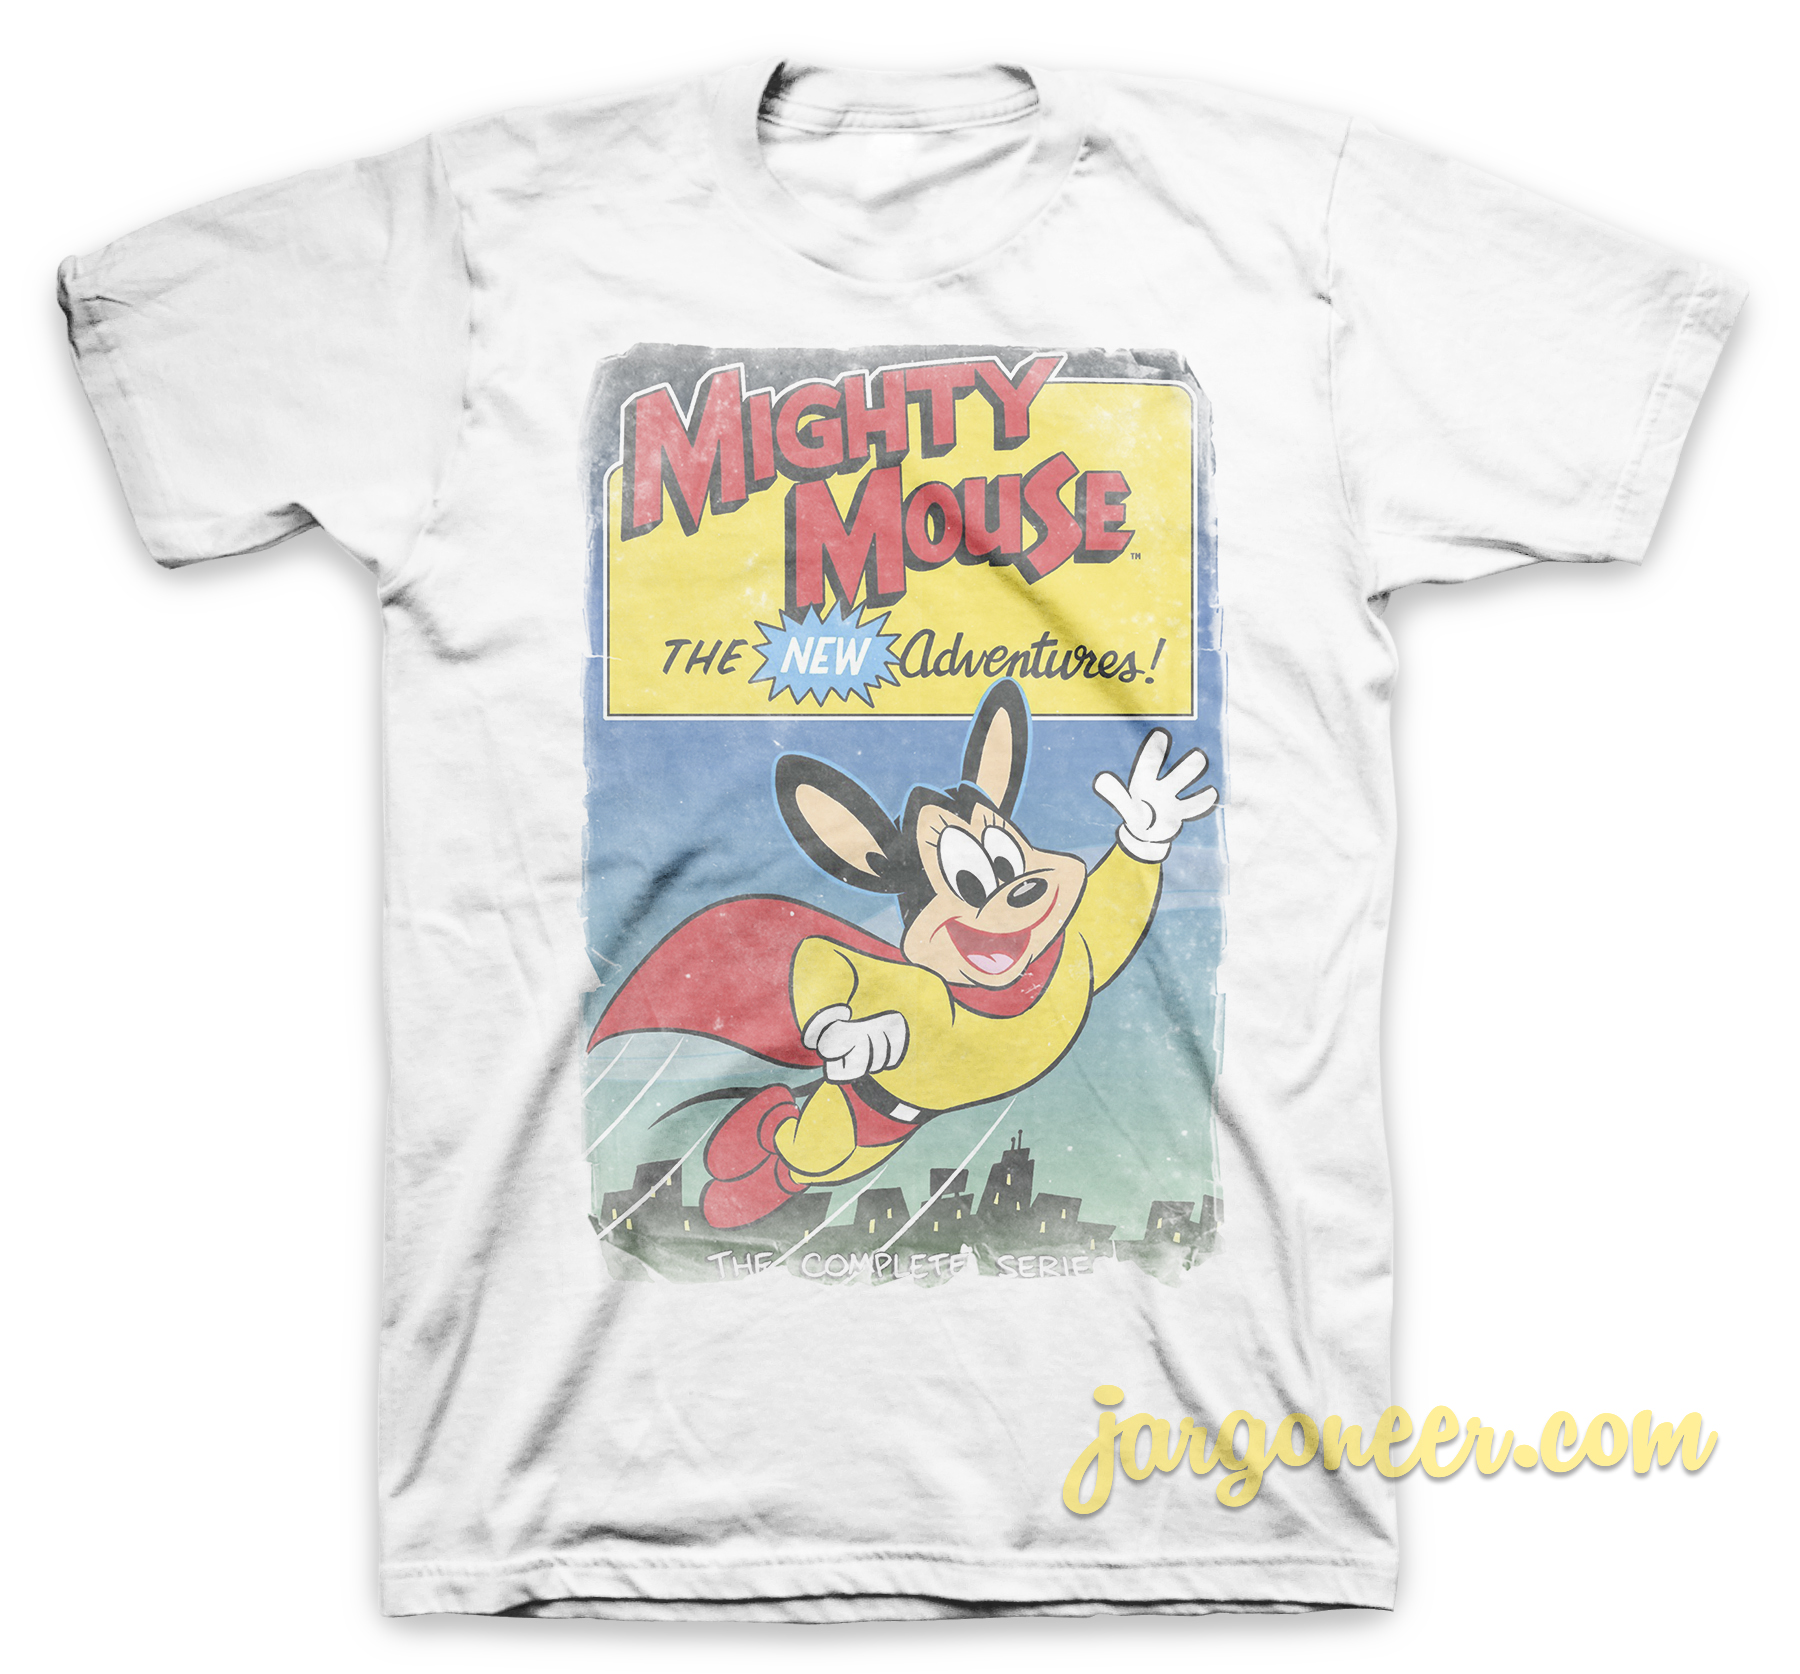 Mighty Mouse The New Adventure White T Shirt - Shop Unique Graphic Cool Shirt Designs